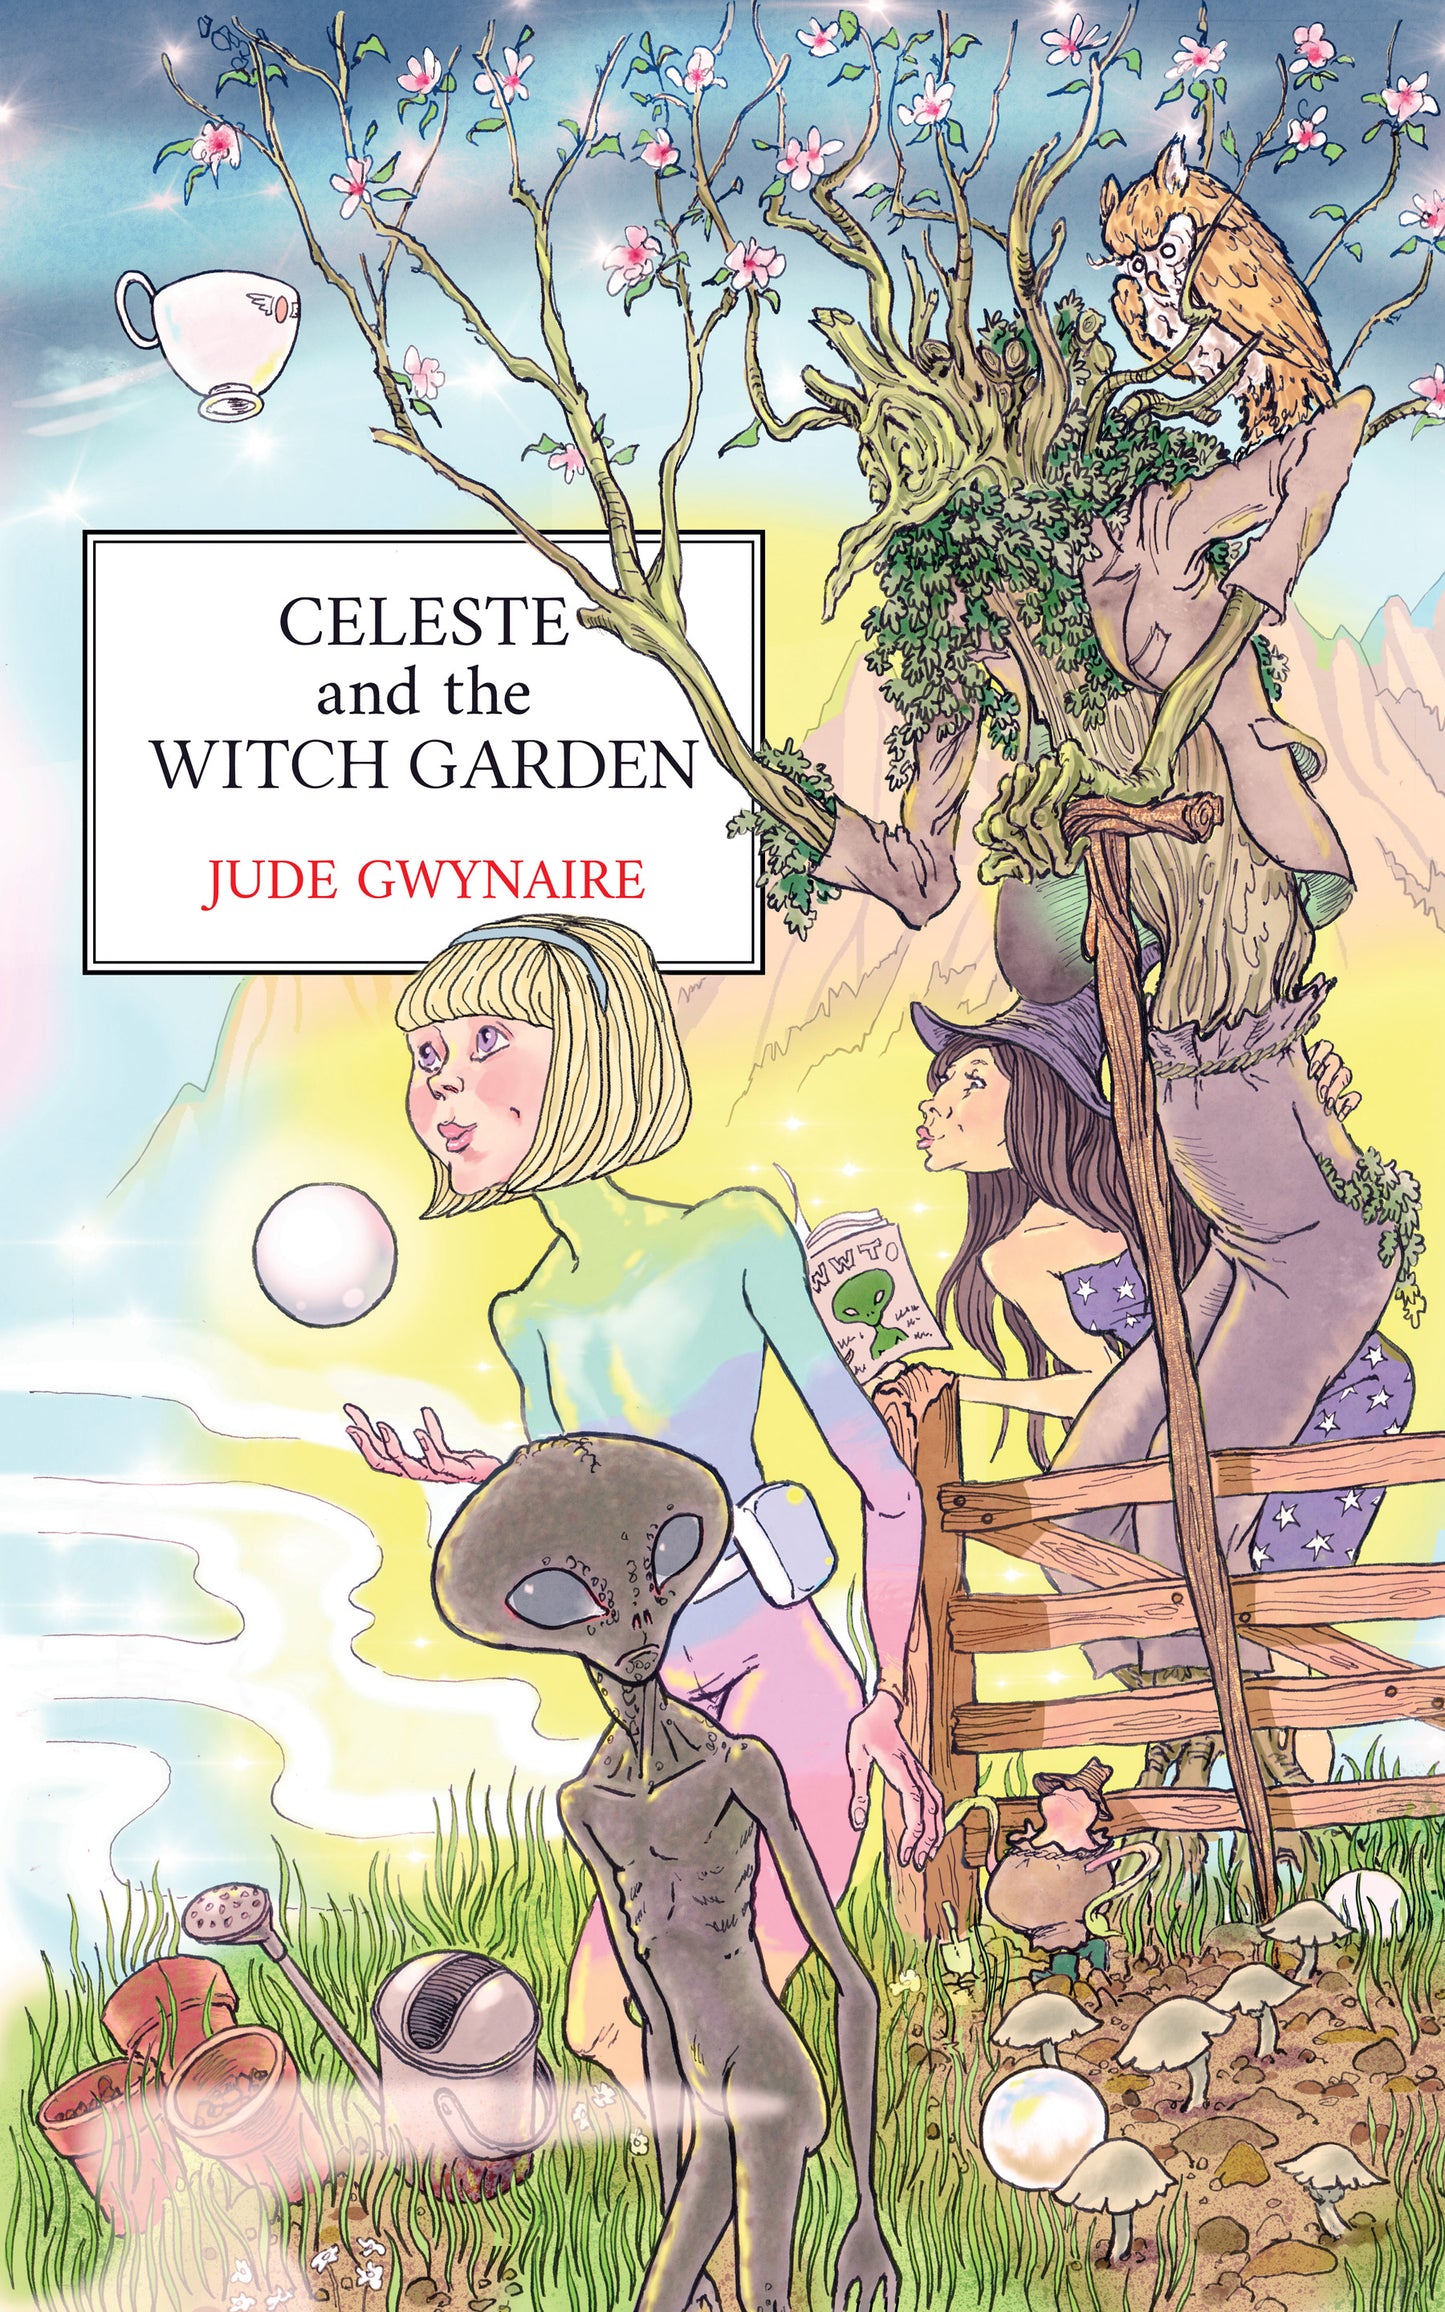 Celeste and the Witch Garden